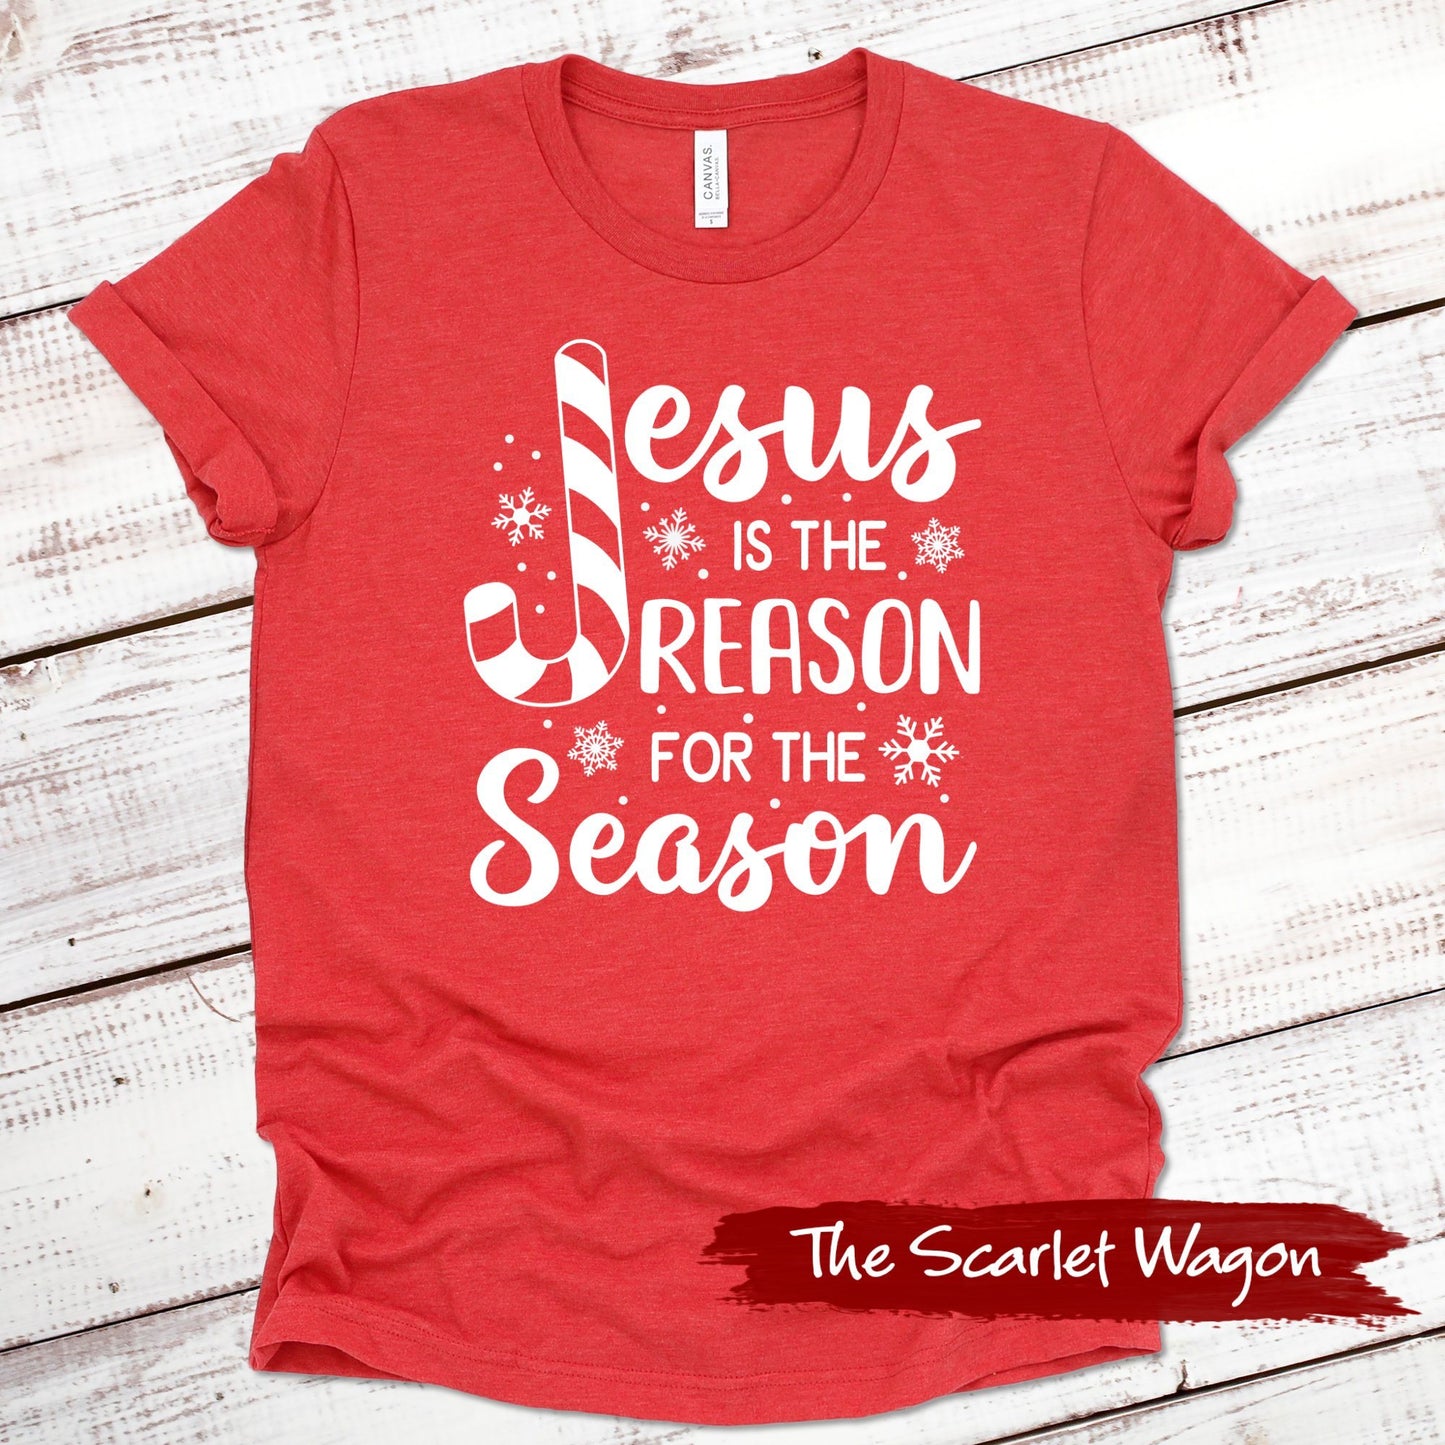 Jesus is the Reason for the Season Christmas Shirt Scarlet Wagon Heather Red XS 